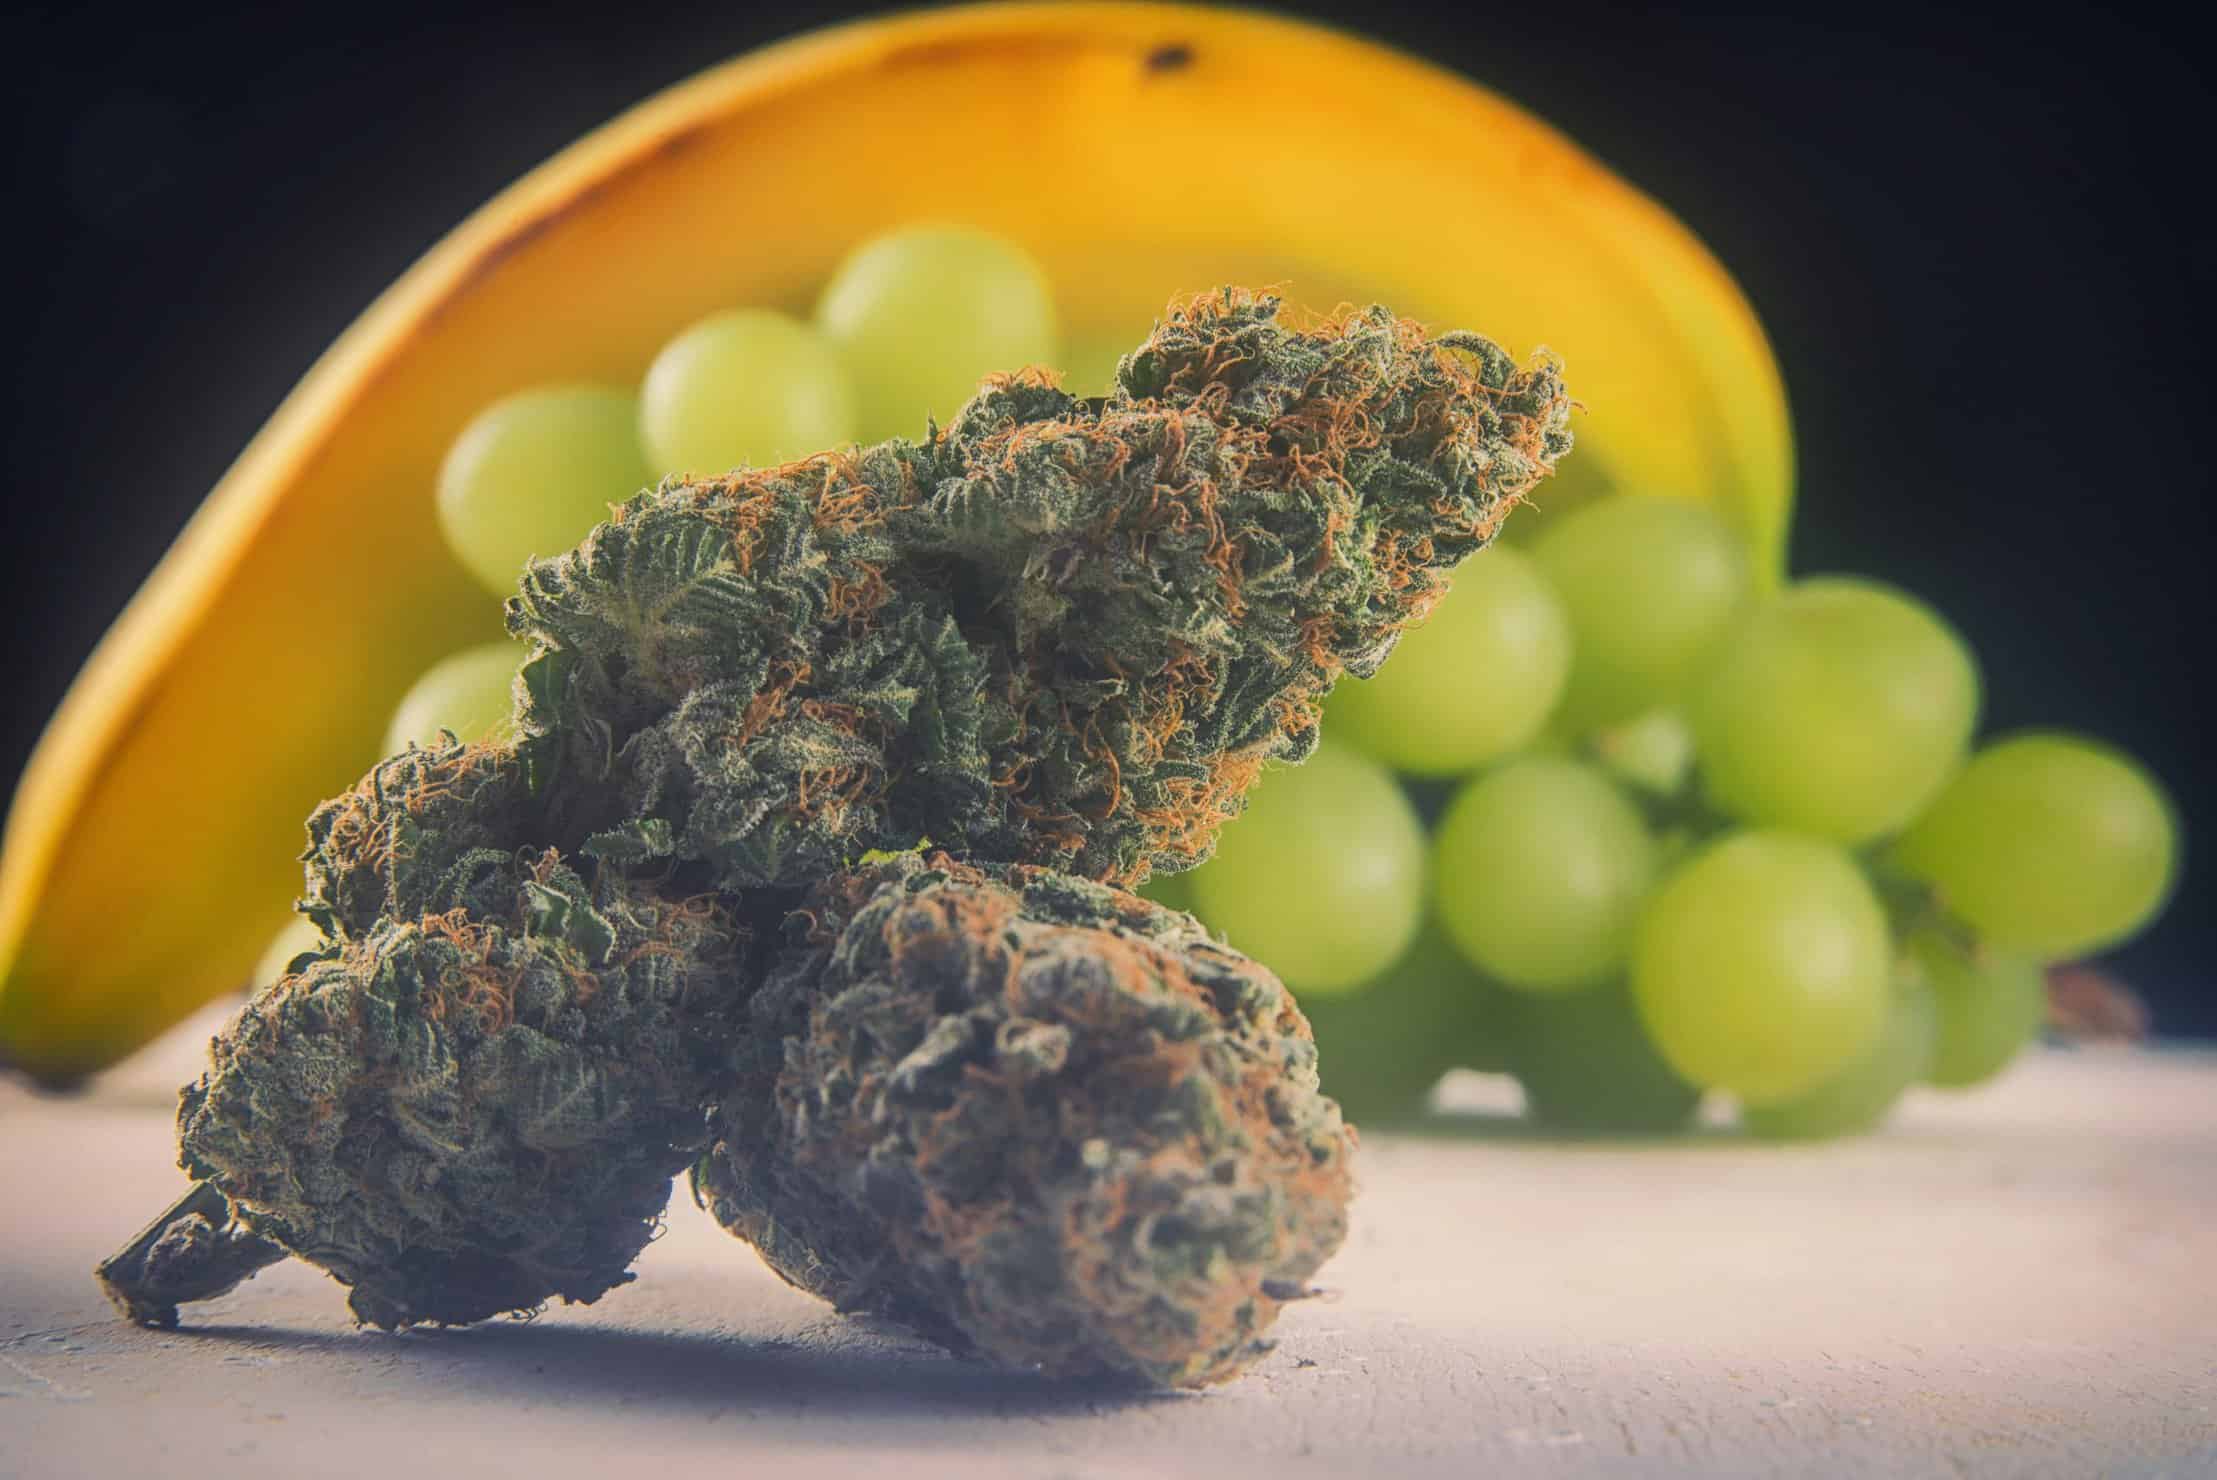 Our 15 Favorite Fruit-Flavored Cannabis Strains